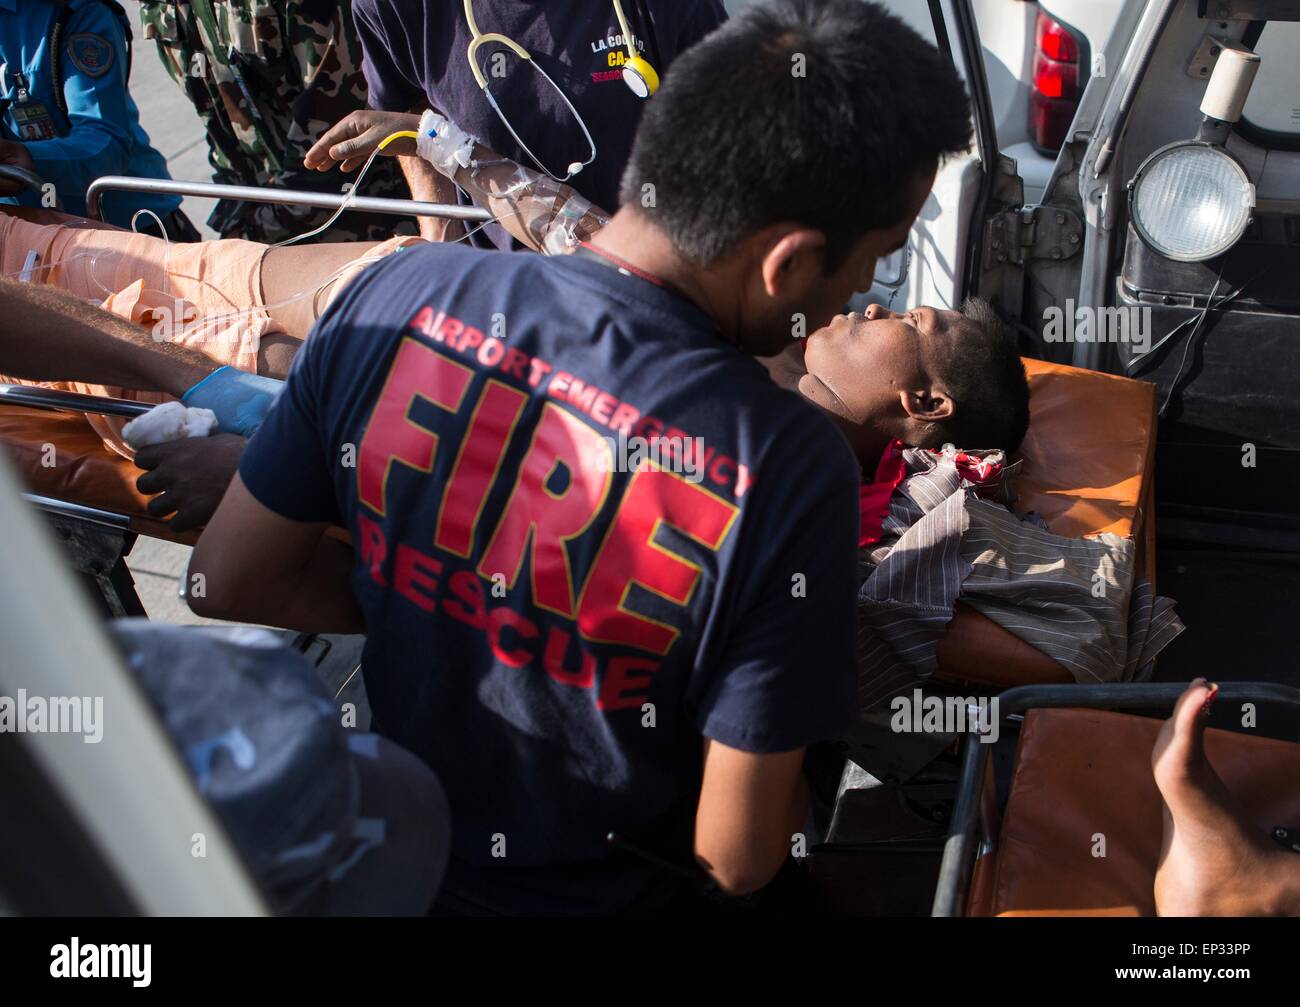 Kathmandu, Nepal. 13th May, 2015. An earthquake victim is loaded into an ambulance at a medical triage area at Tribhuvan International Airport May 12, 2015 in Kathmandu, Nepal. A 7.3 magnitude aftershock earthquake struck the kingdom following the 7.8 magnitude earthquake on April 25th. Stock Photo